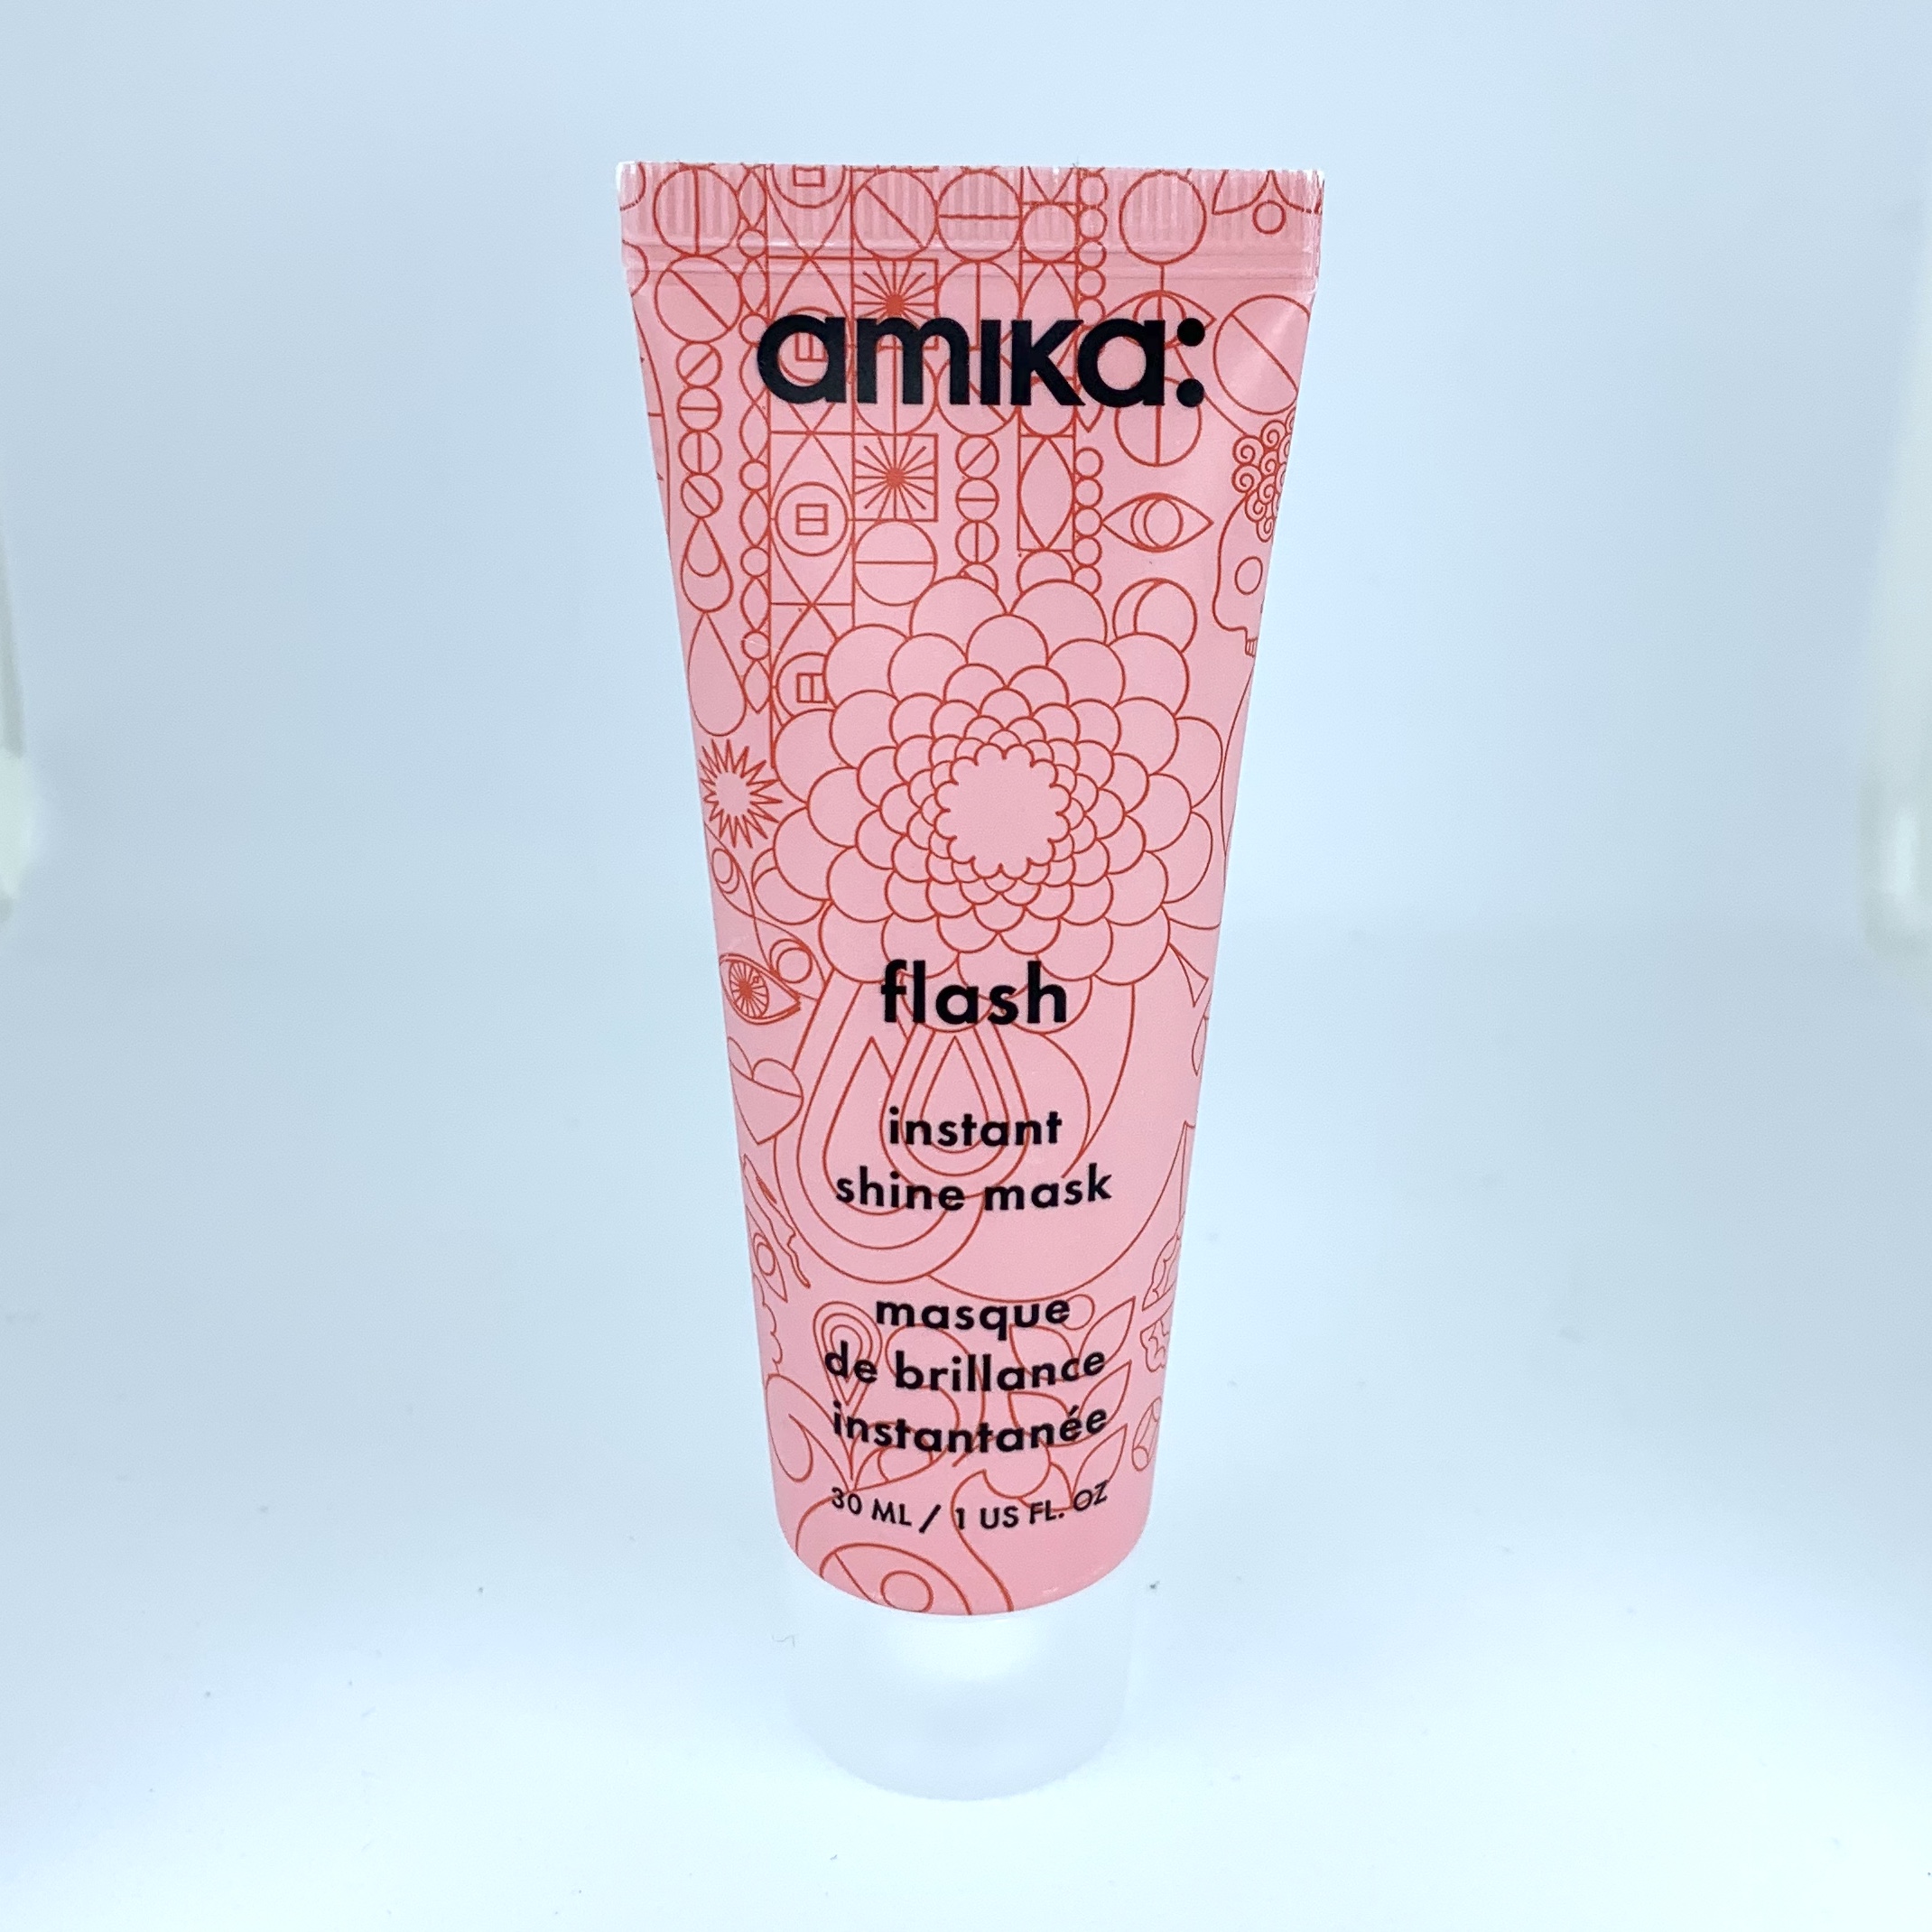 Amika Flash Instant Shine Mask Front for Birch Box June 2020